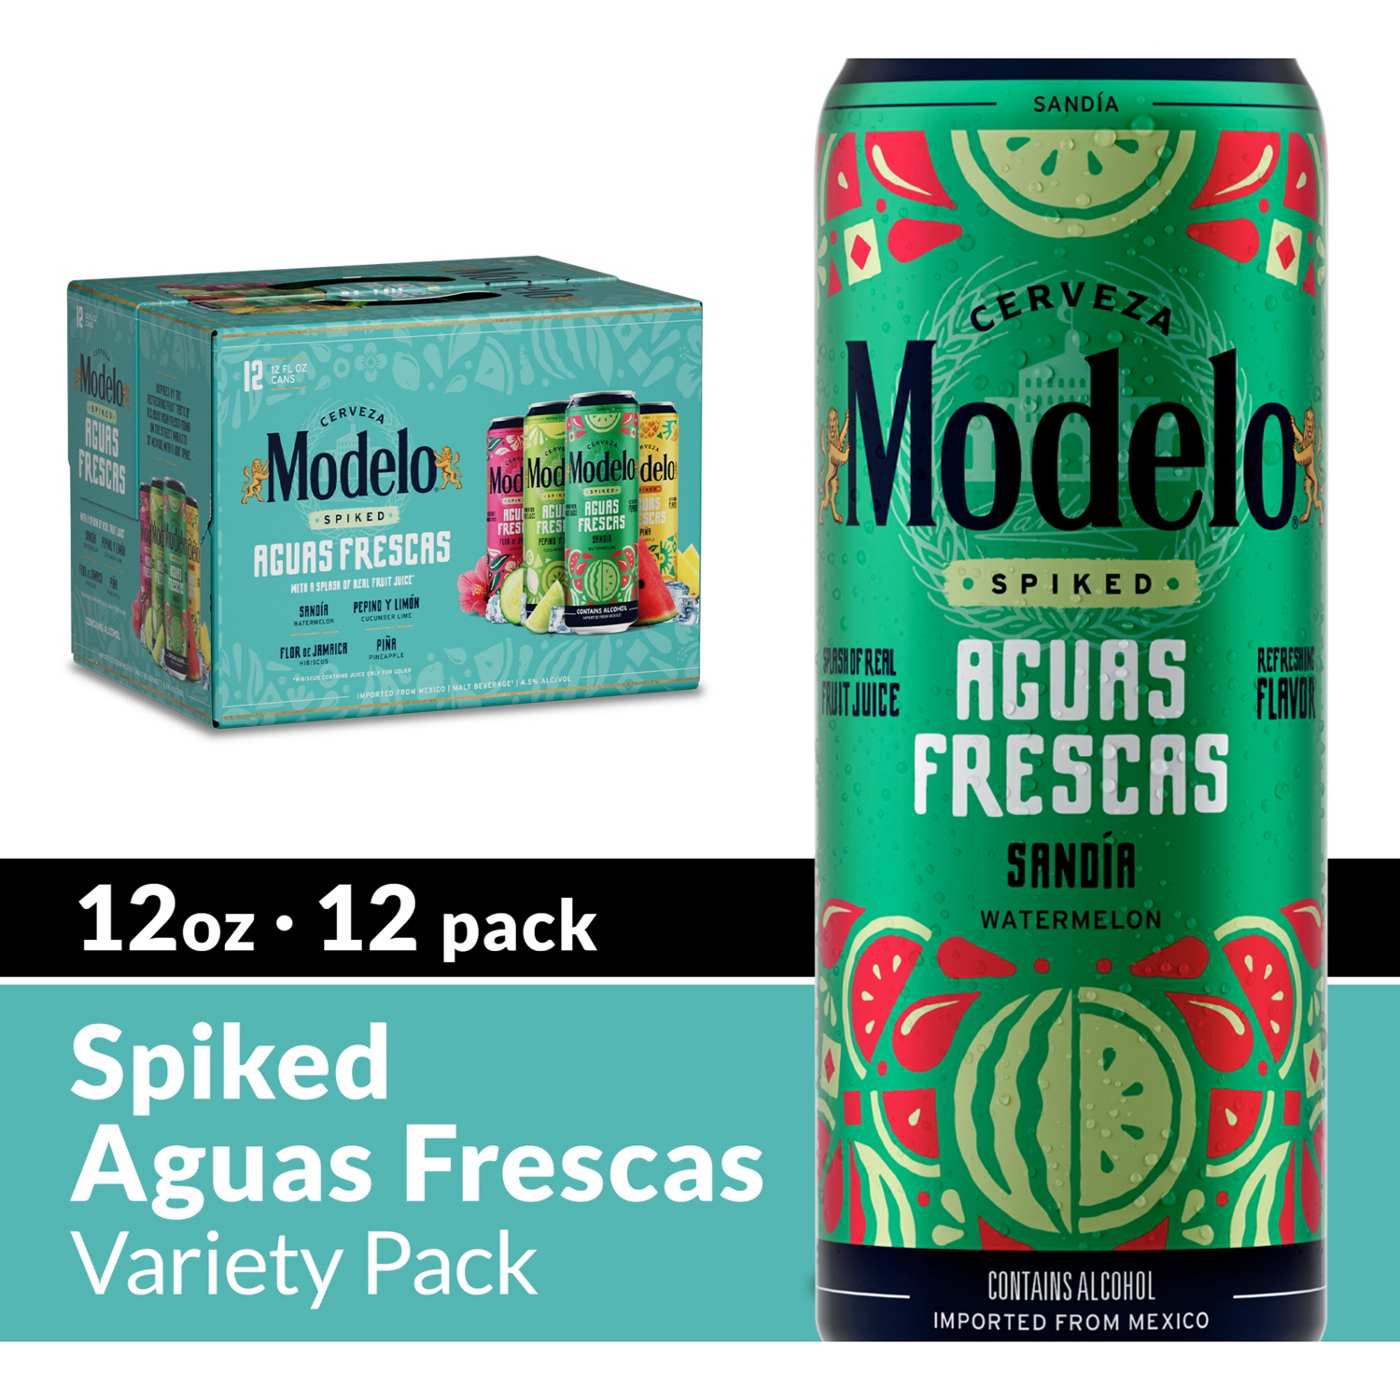 Modelo Spiked Aguas Frescas Spiked Frescas Variety Pack 12 pk Cans; image 5 of 8